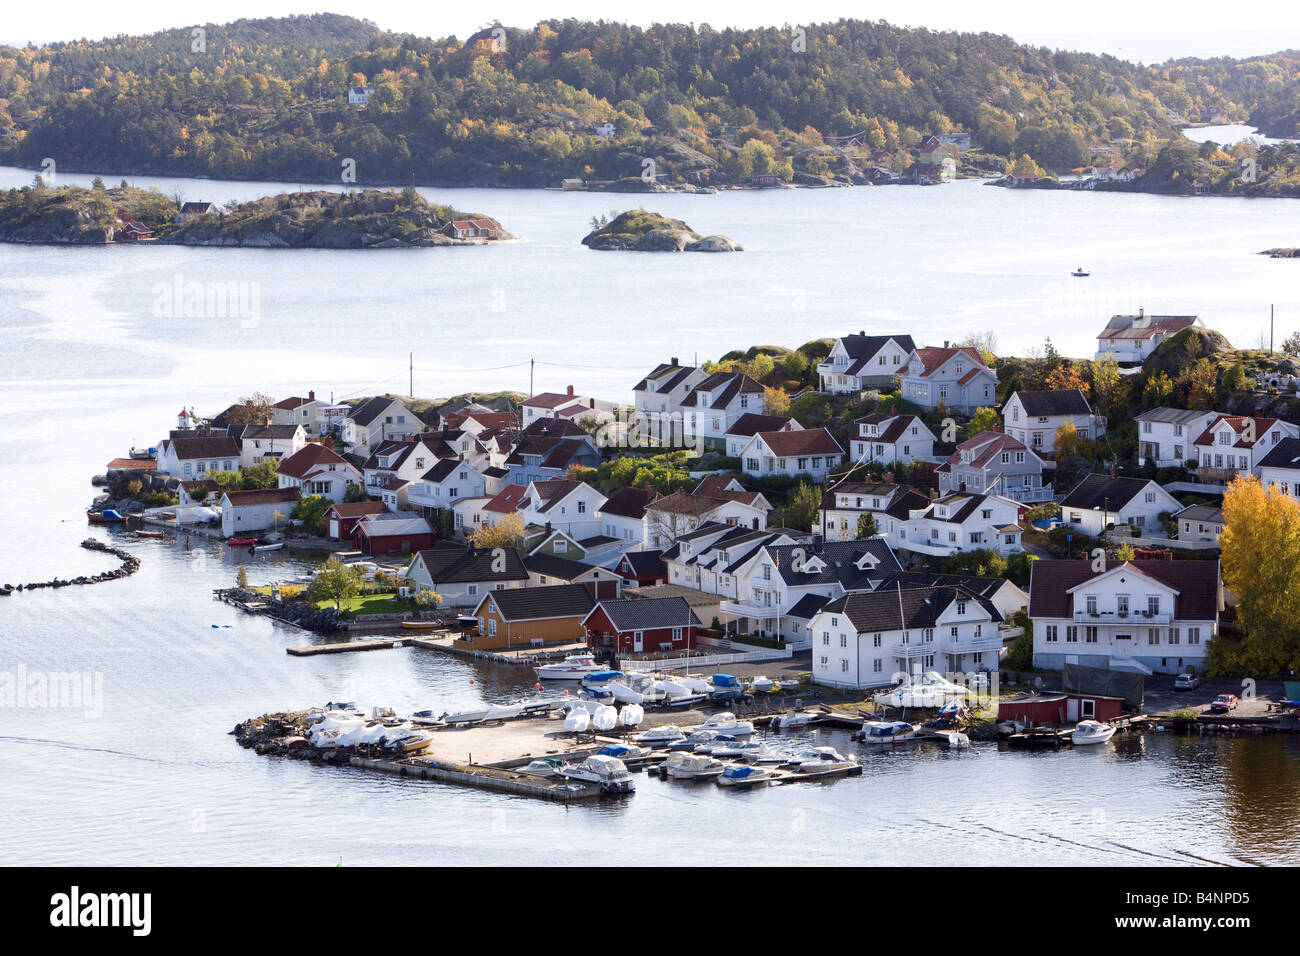 View of the town of Kragero in the Telemark region of Norway Stock Photo